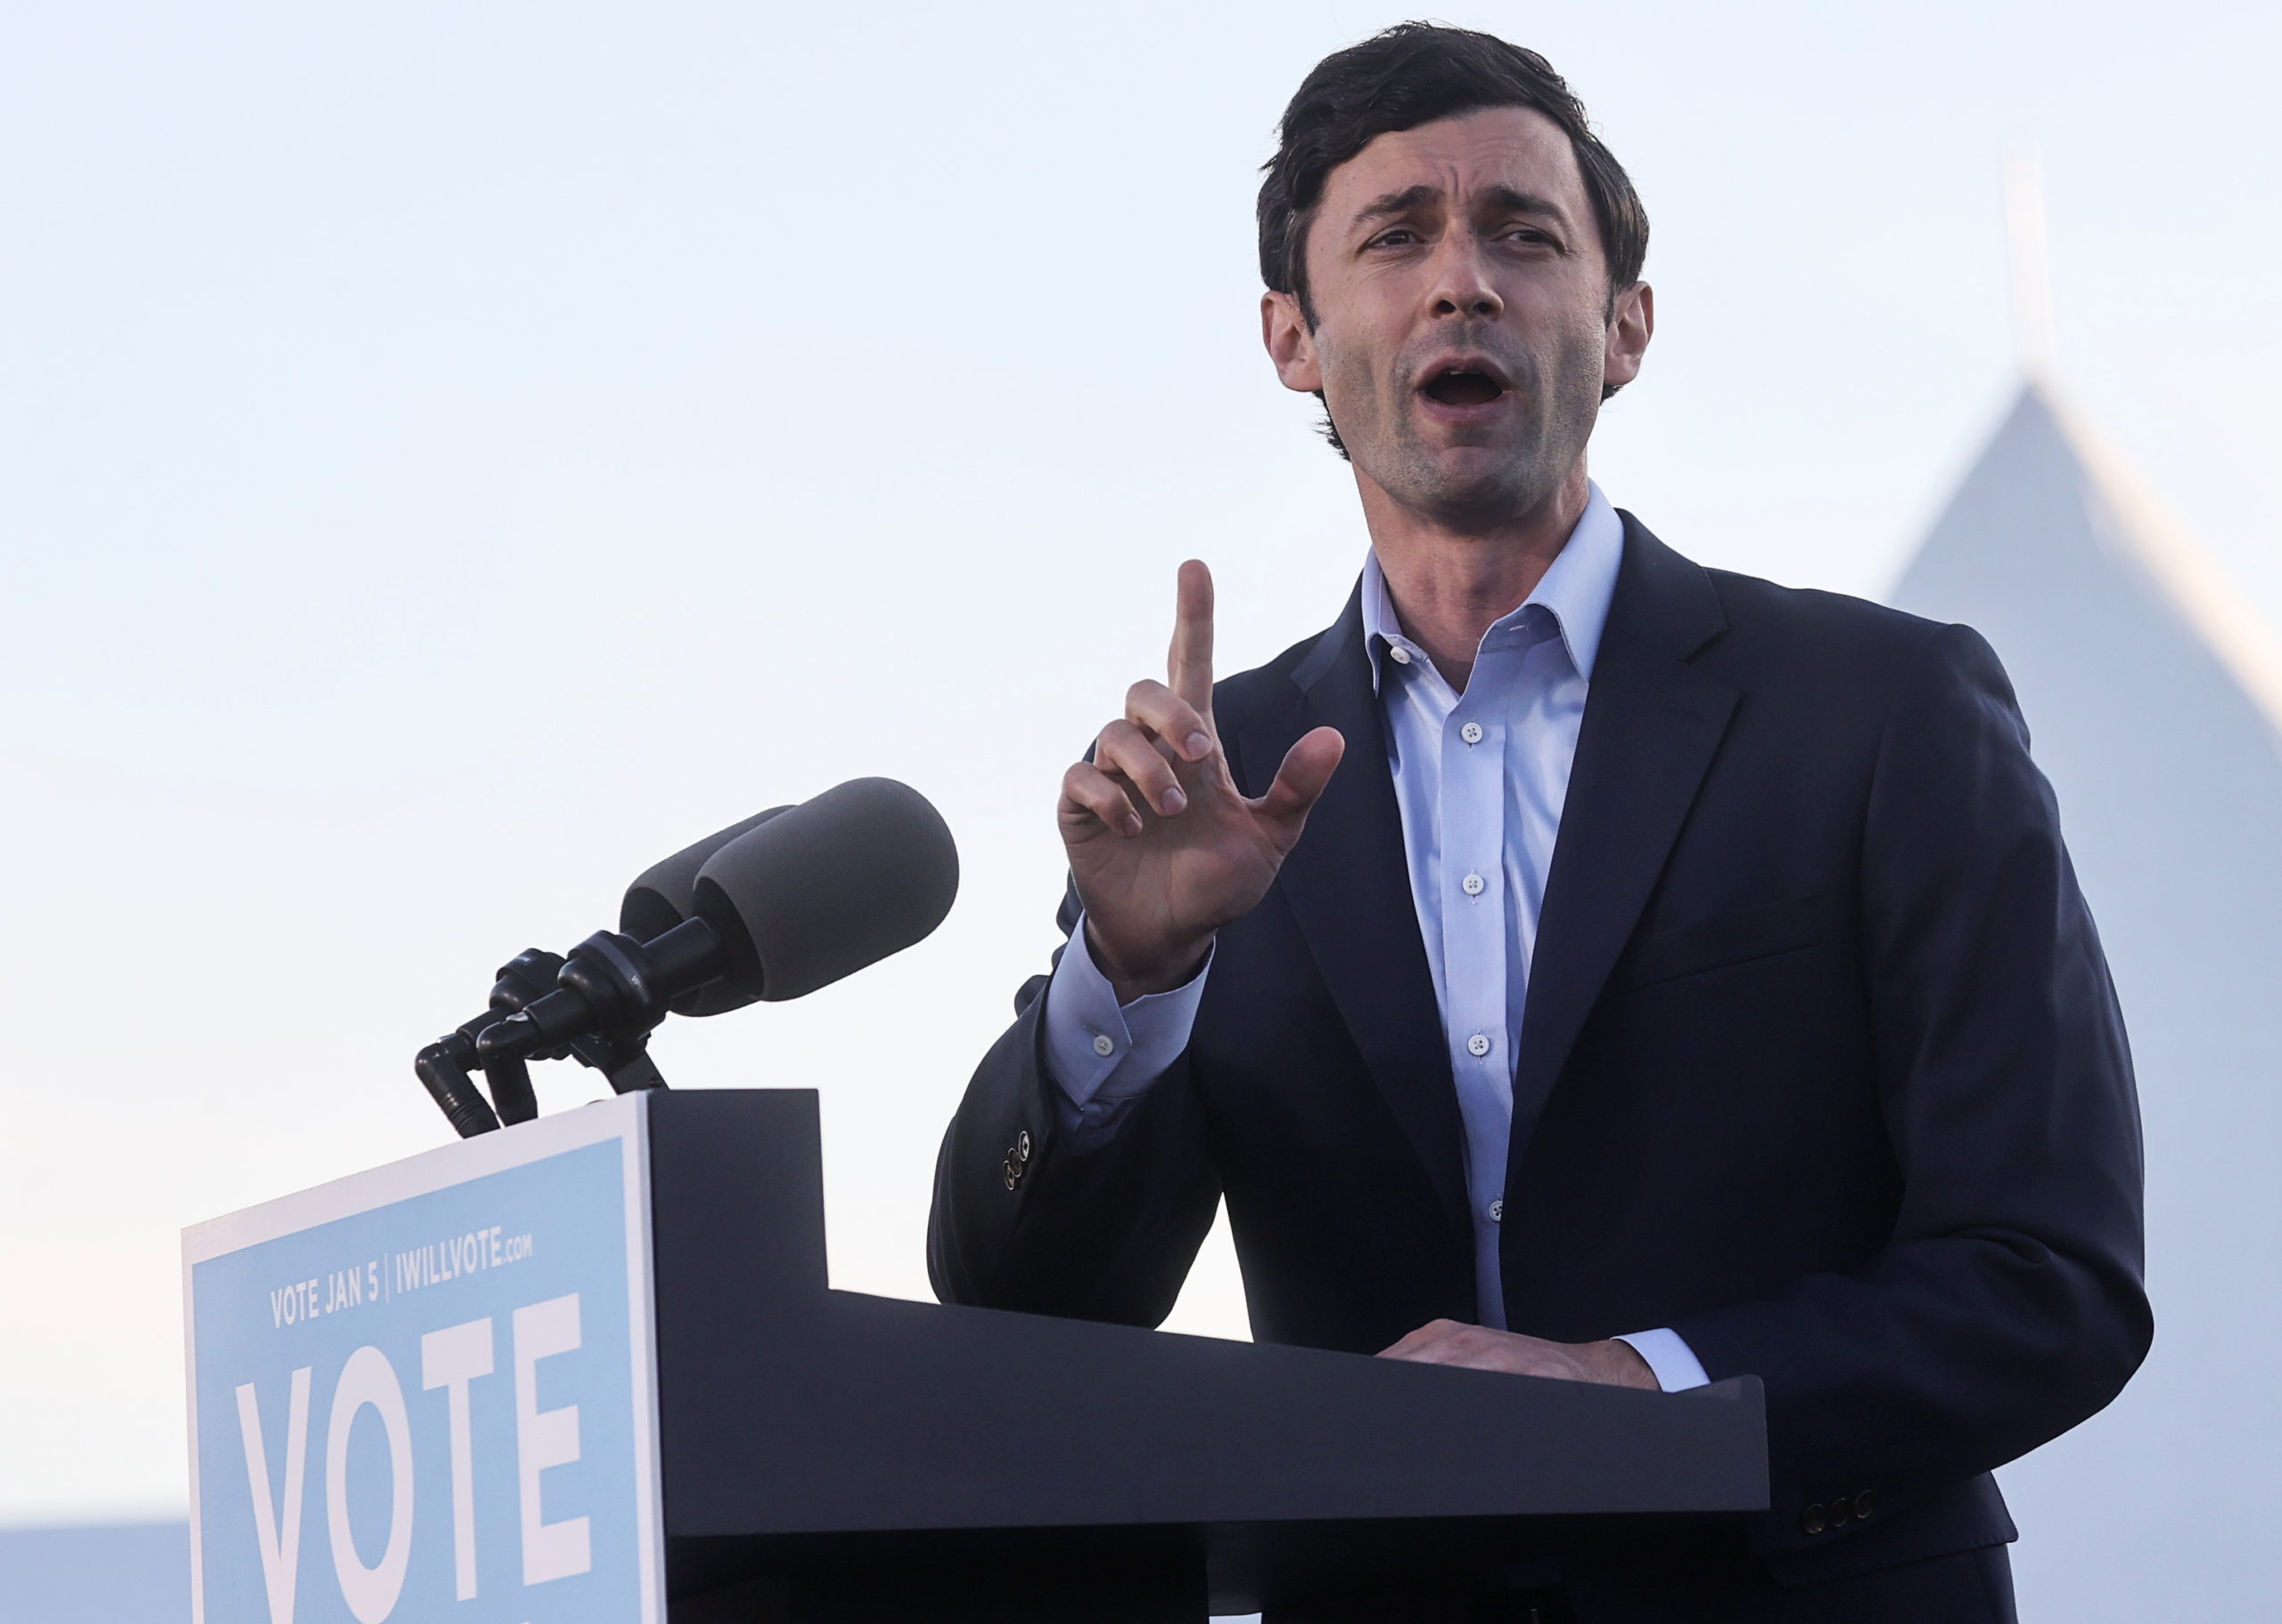 Democratic U.S. Senate candidate from Georgia Jon Ossoff speaks prior to the arrival of U.S. President-elect Joe Biden at a drive-in campaign rally ahead of the January 5 run-off elections, in Atlanta, Georgia, U.S., January 4, 2021. REUTERS/Jonathan Ernst